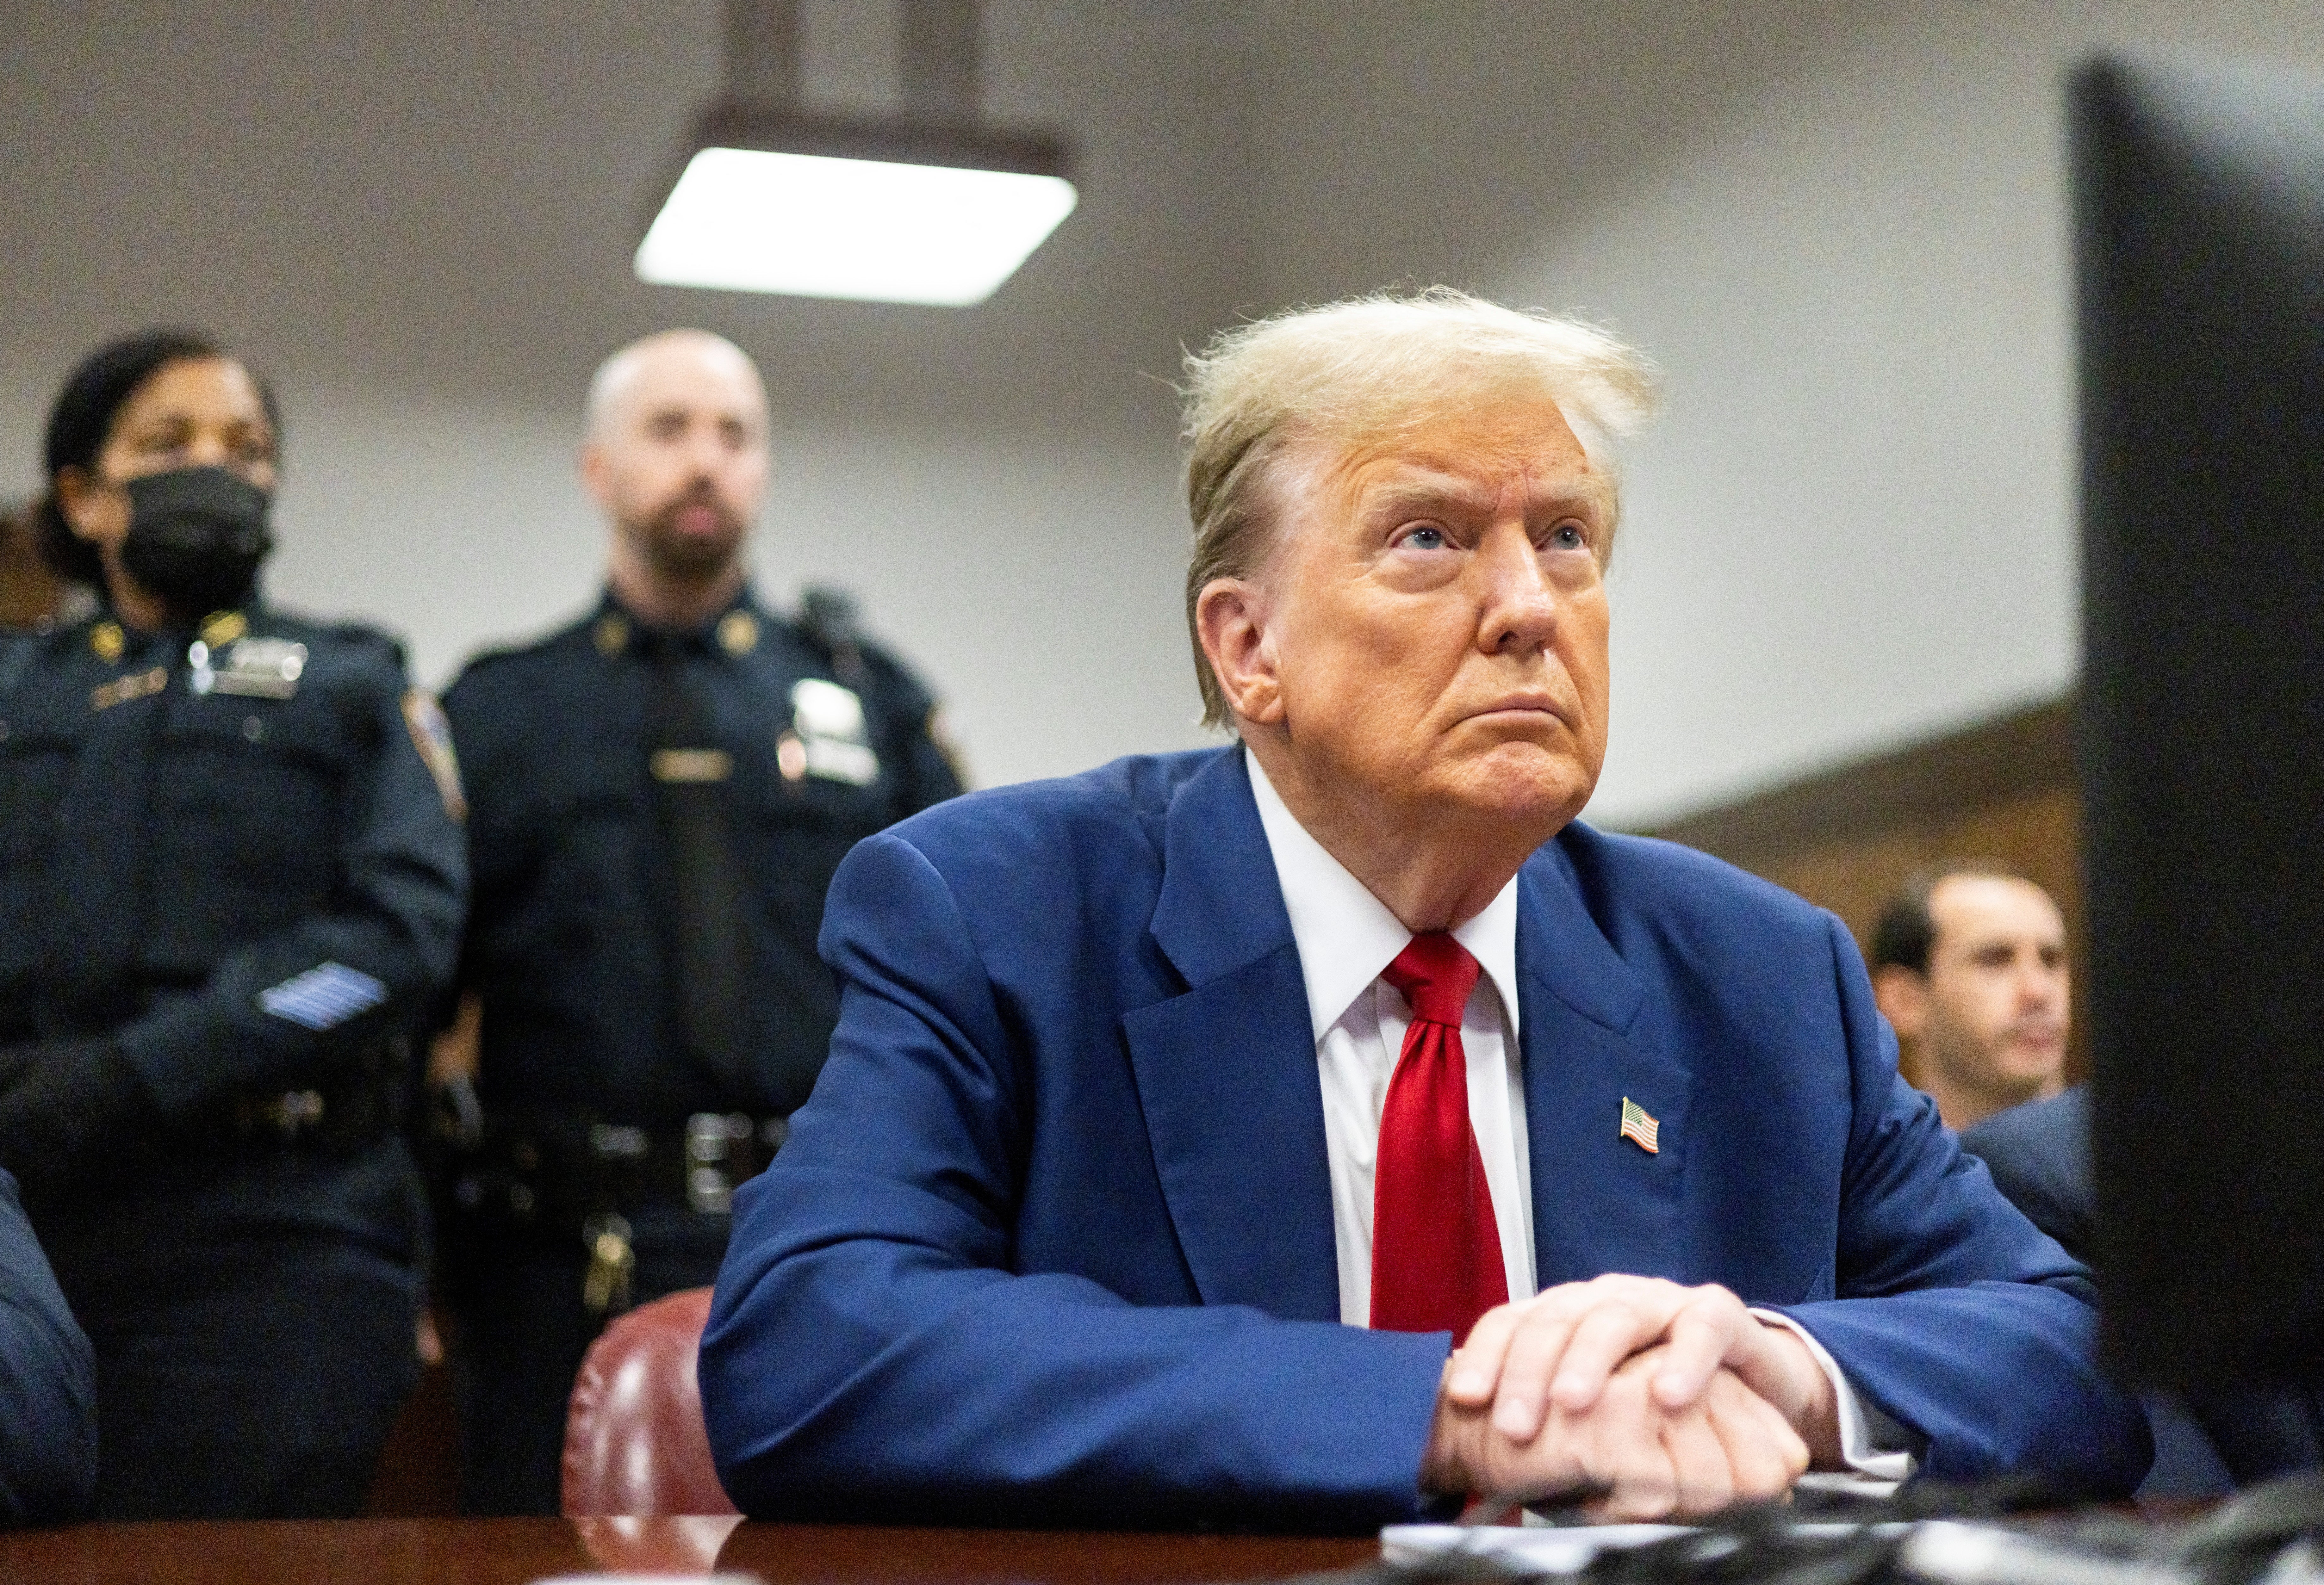 Donald Trump is seated at the defence table inside the courtroom on 30 April